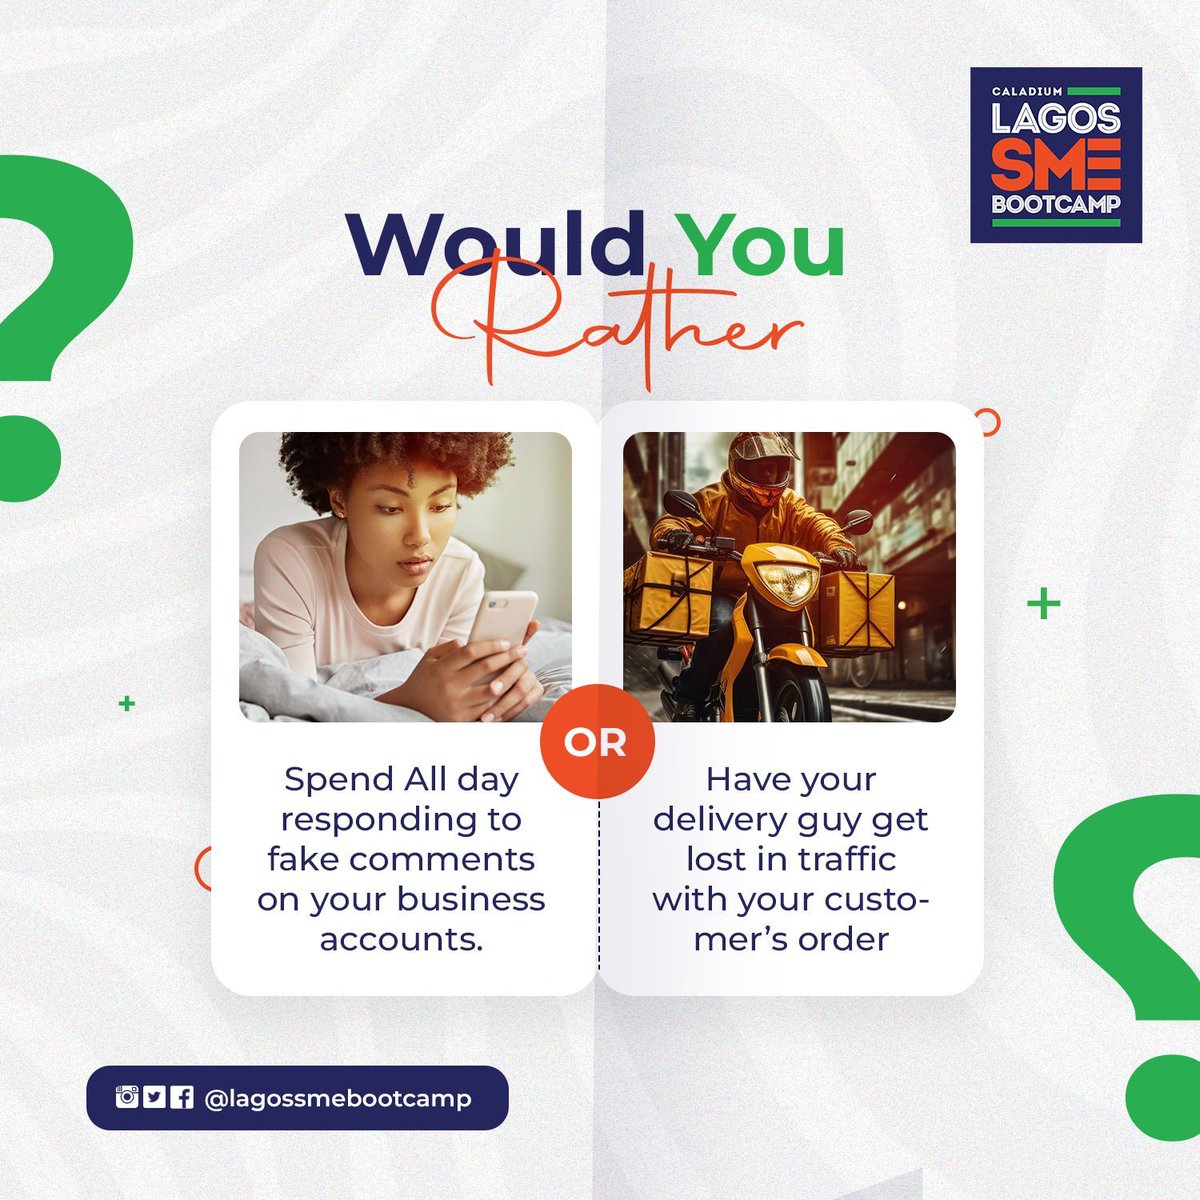 It’s Would You Rather Monday! Which fire would you rather fight first? 🤔 And how will you handle the other issue? Let us know in the comments.👇🏼 #sme #caladiumsme #caladiumsmebootcamp #clsme #lagossme